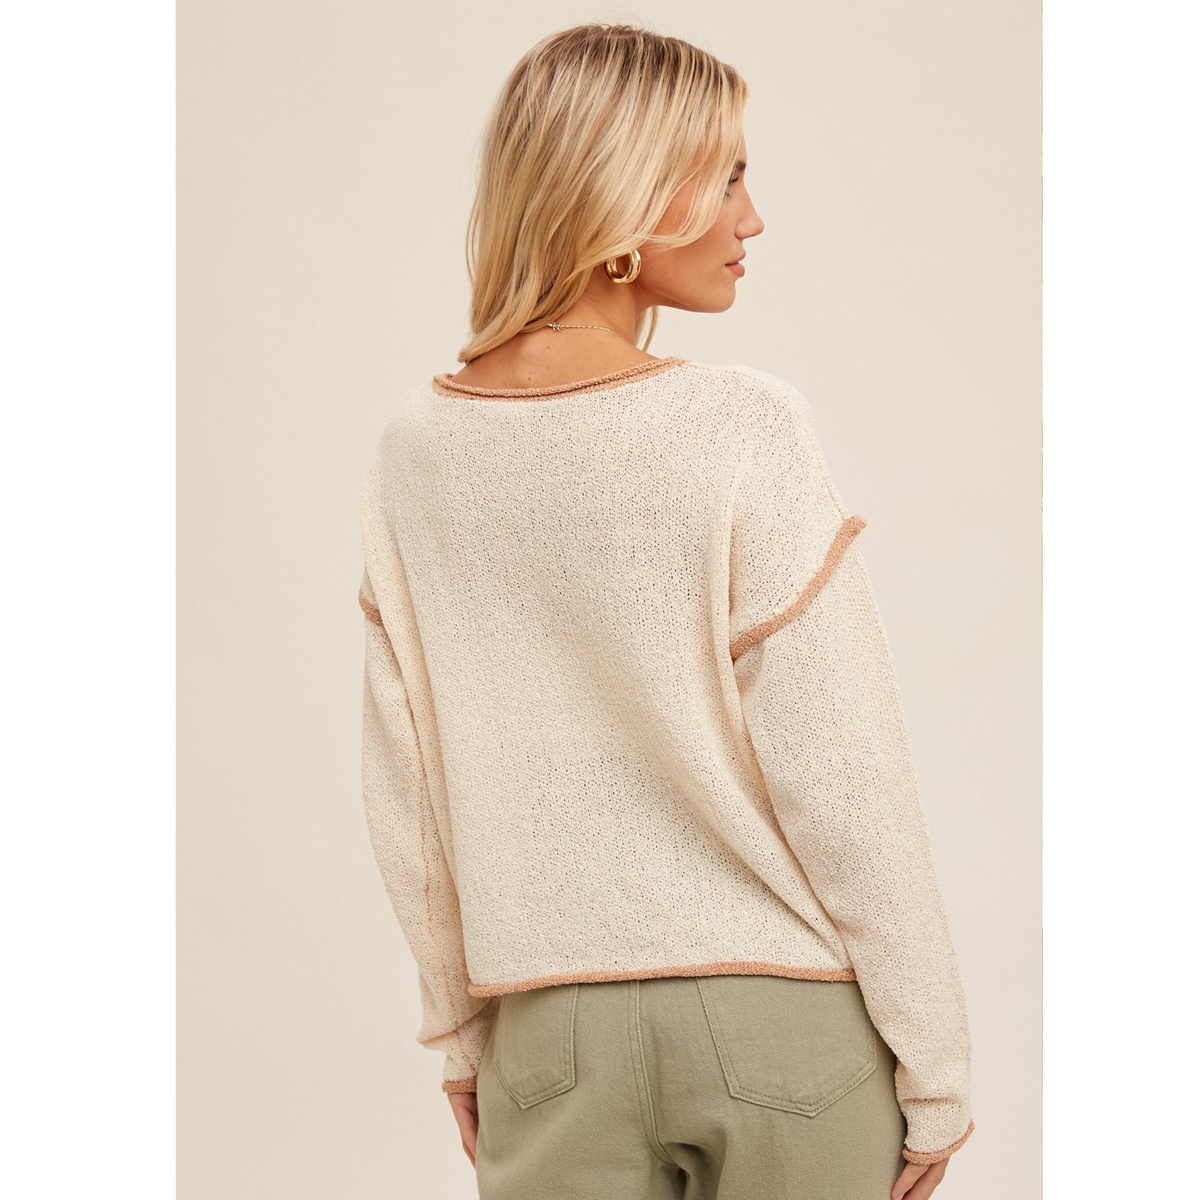 Boat Neck Thread Contrast Loose Fit Sweater